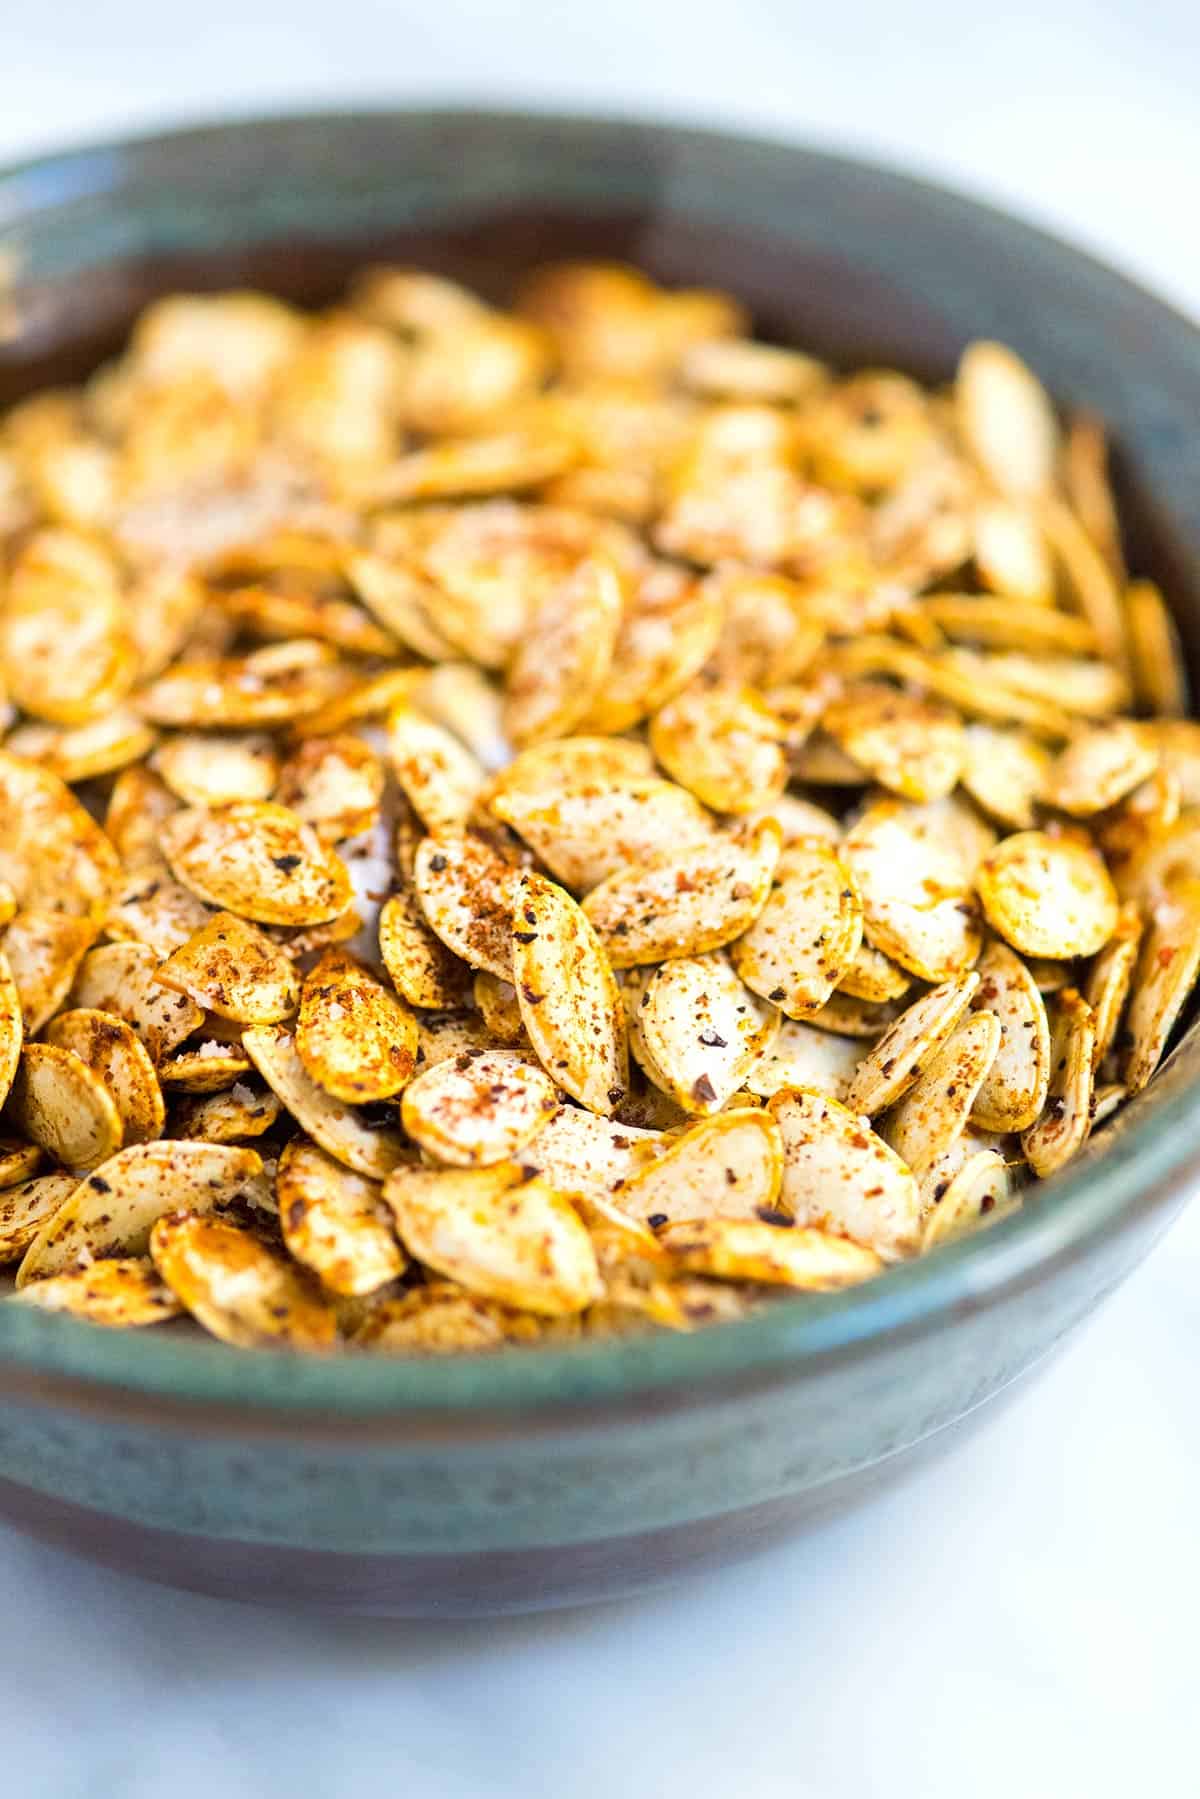 Pumpkin Seed Recipes for Weight Loss